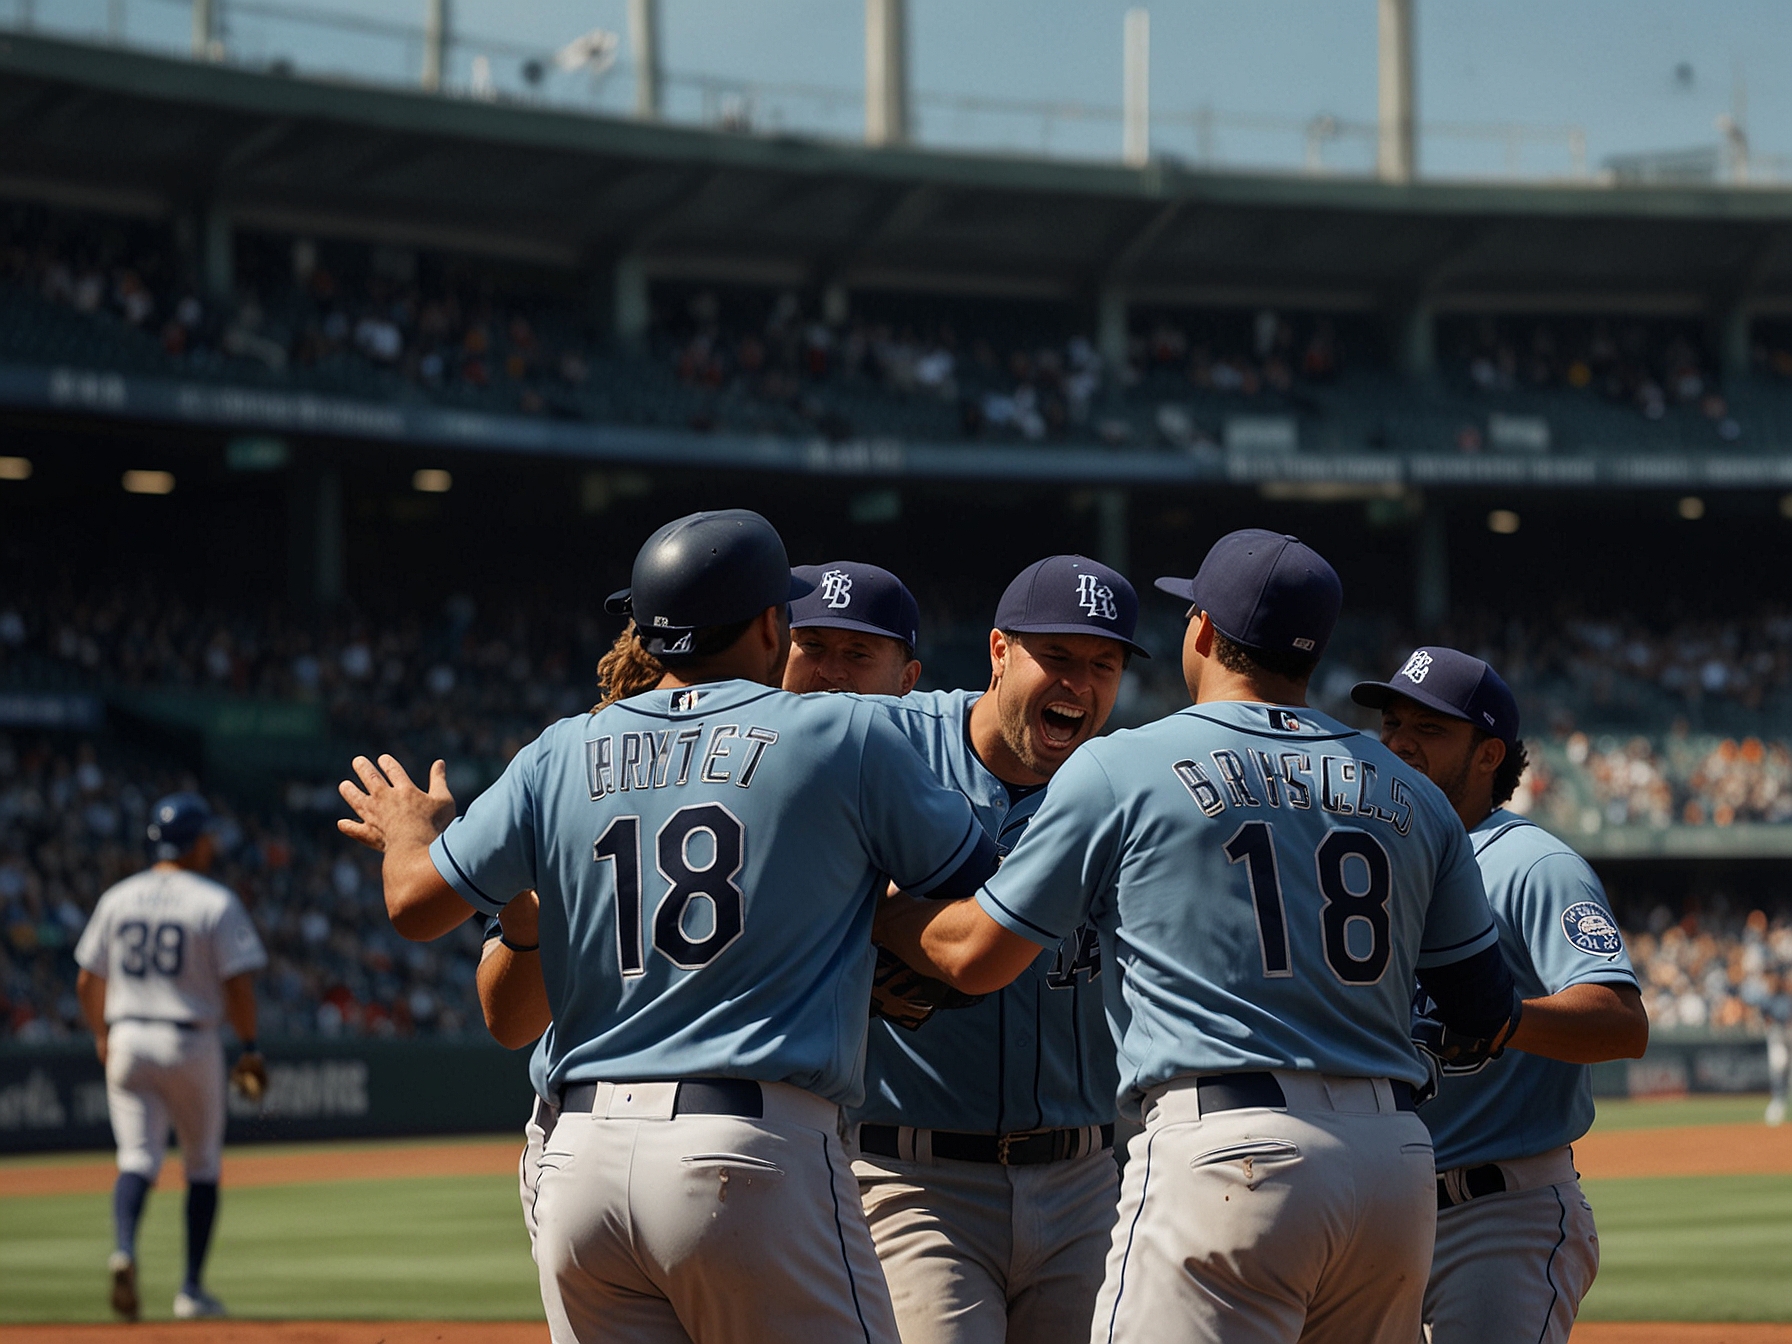 Tampa Bay Rays players rejoice on the field at Truist Park after averting a sweep with a crucial 8-6 victory, fueled by Jose Siri's critical home run.